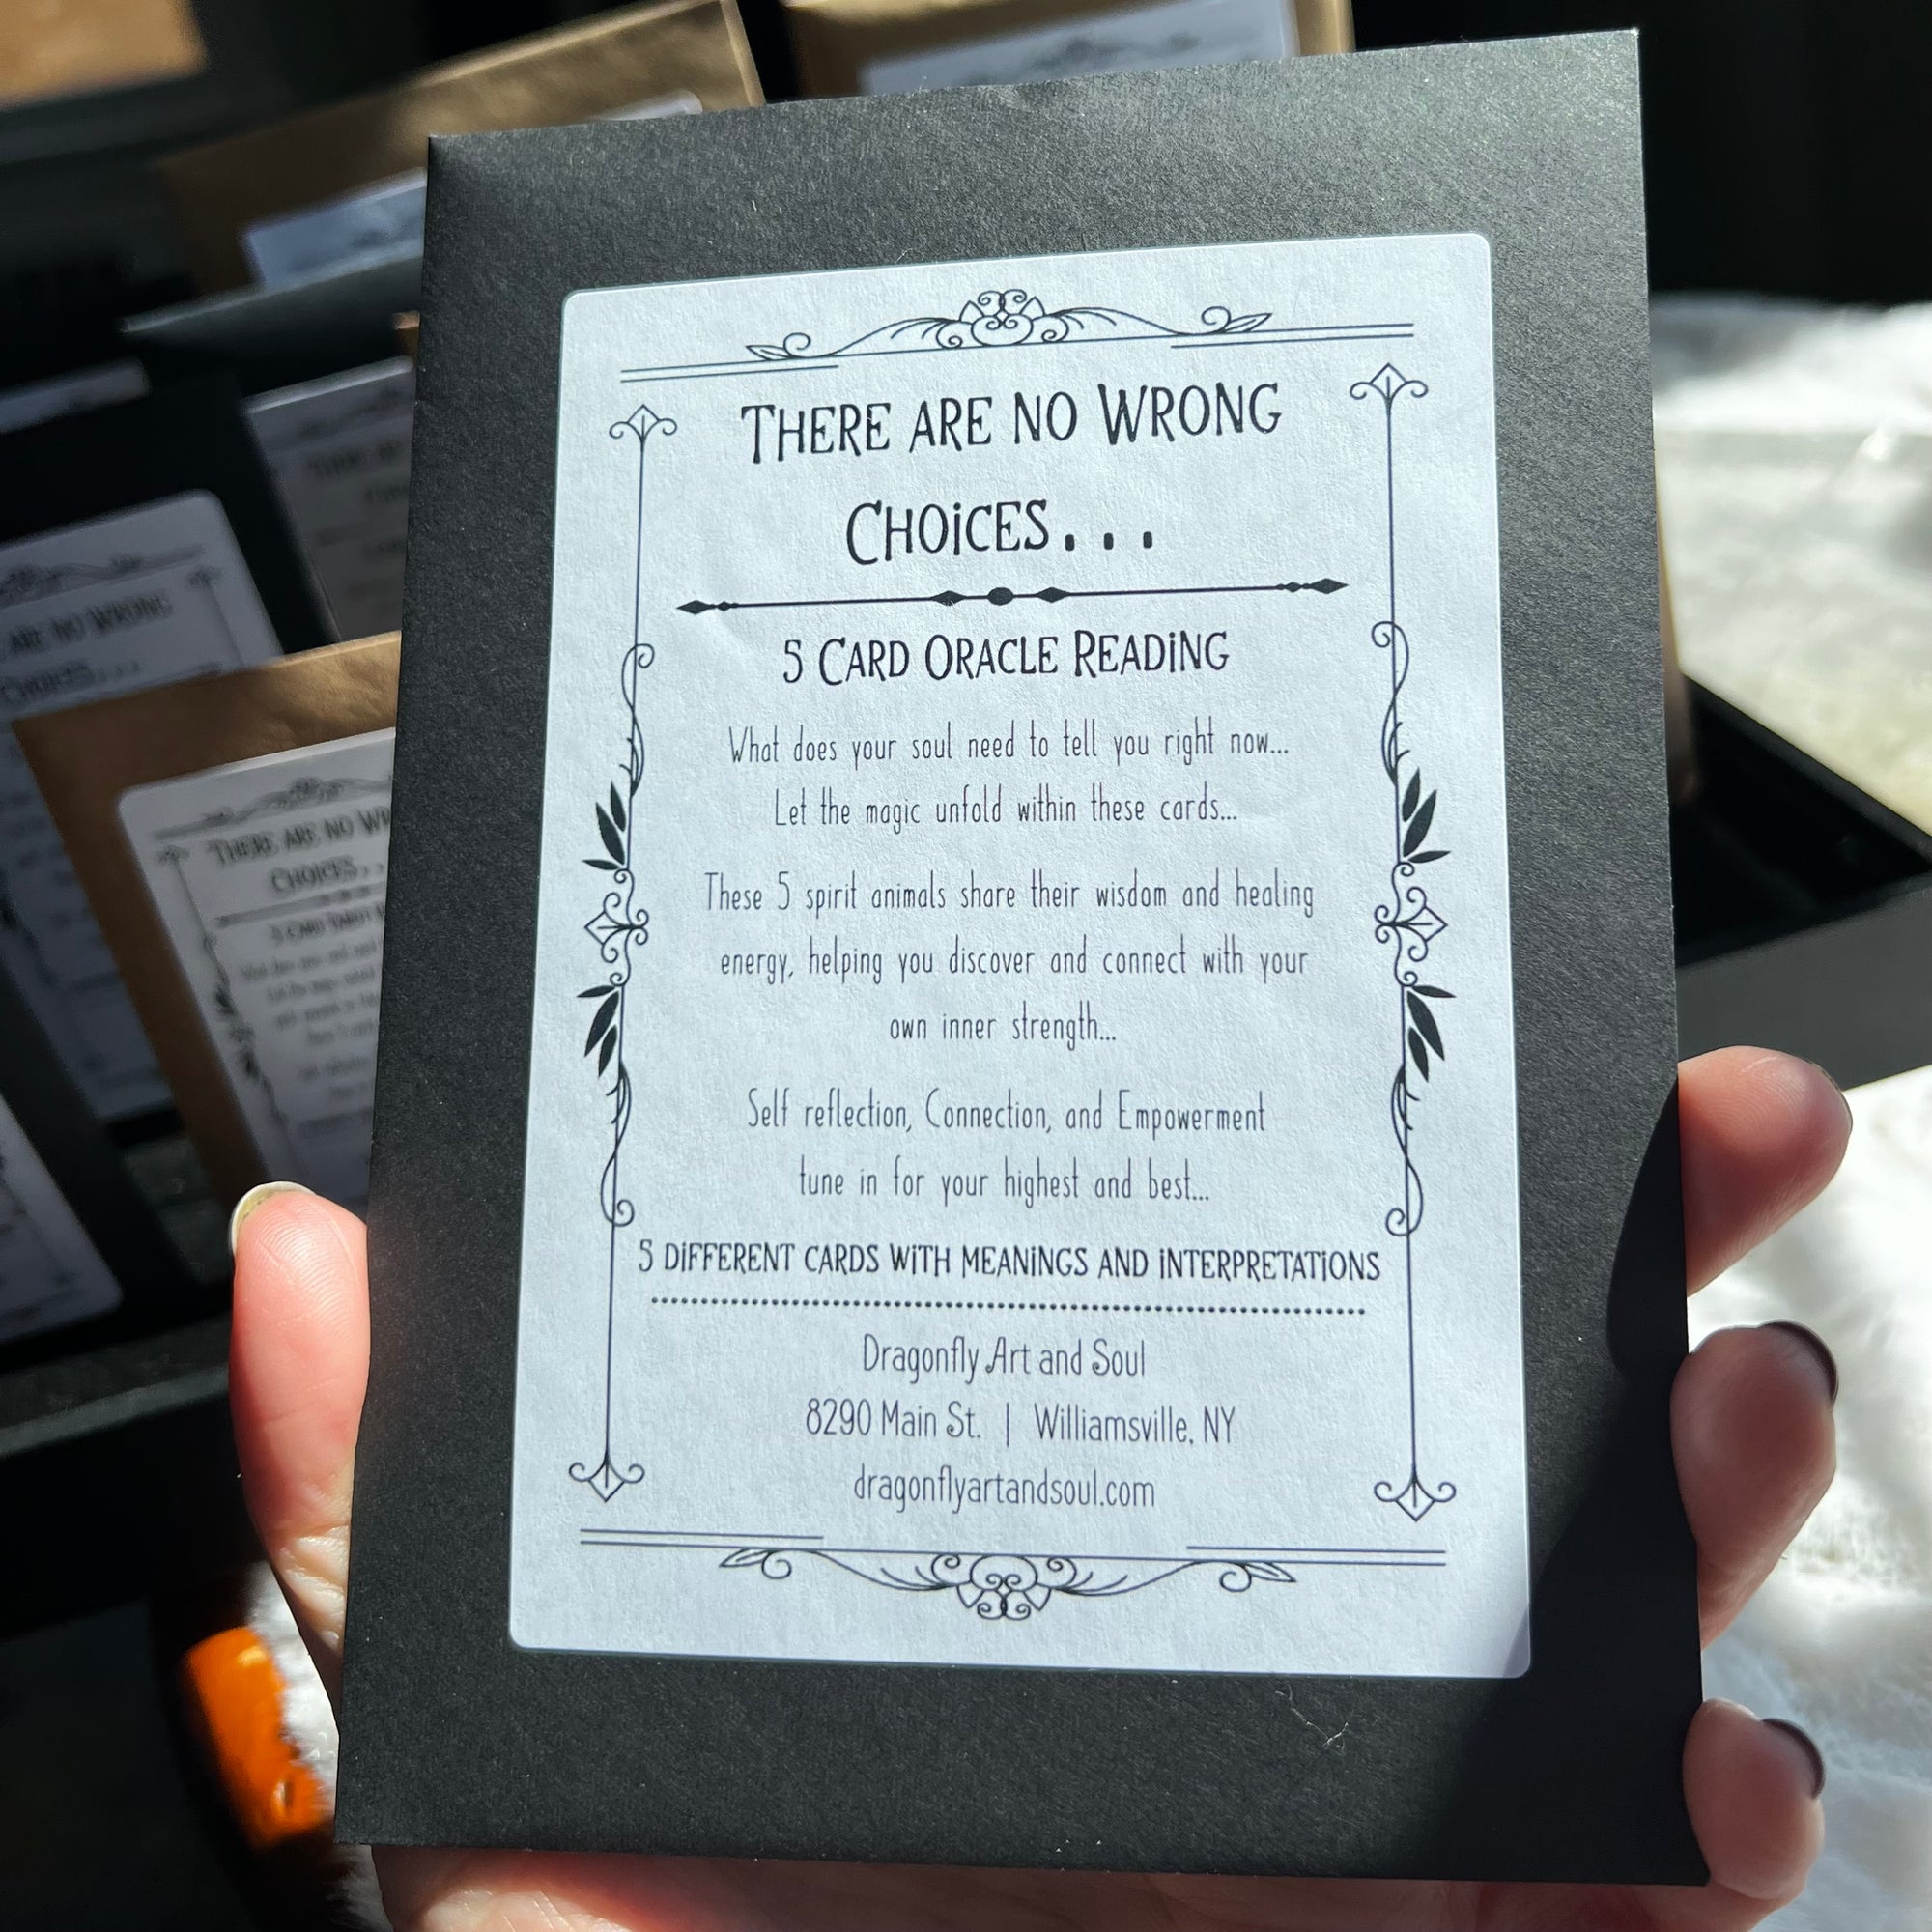 A hand holding a black card with a white label titled "5 Card Mini Oracle Reading." The text describes a reading service that guides your soul's journey through self-reflection and empowerment, offering insight. Located at 8290 Main St., Williamsville, NY.